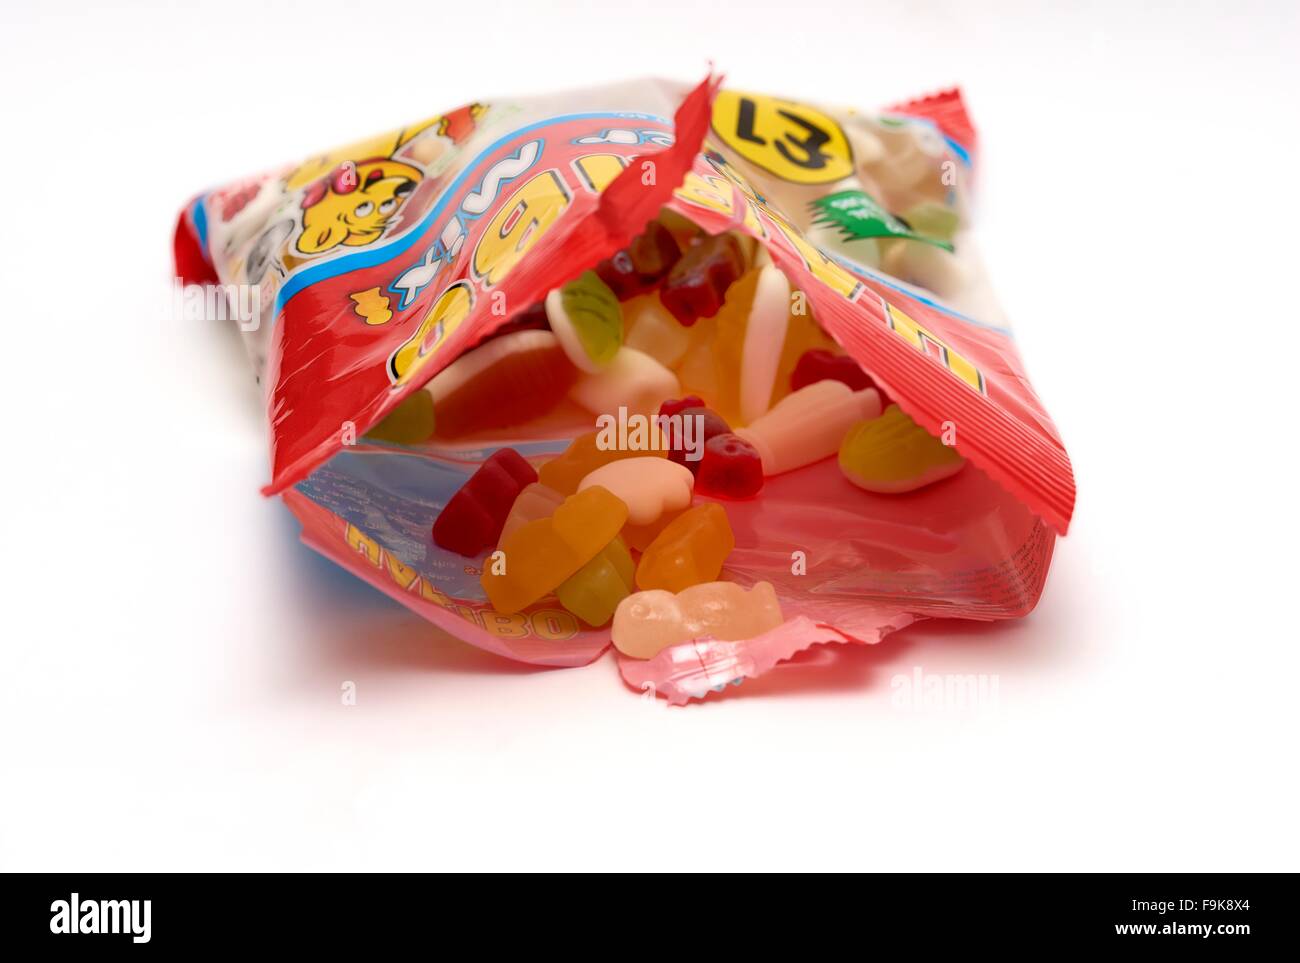 An open bag of Haribo sweets Stock Photo